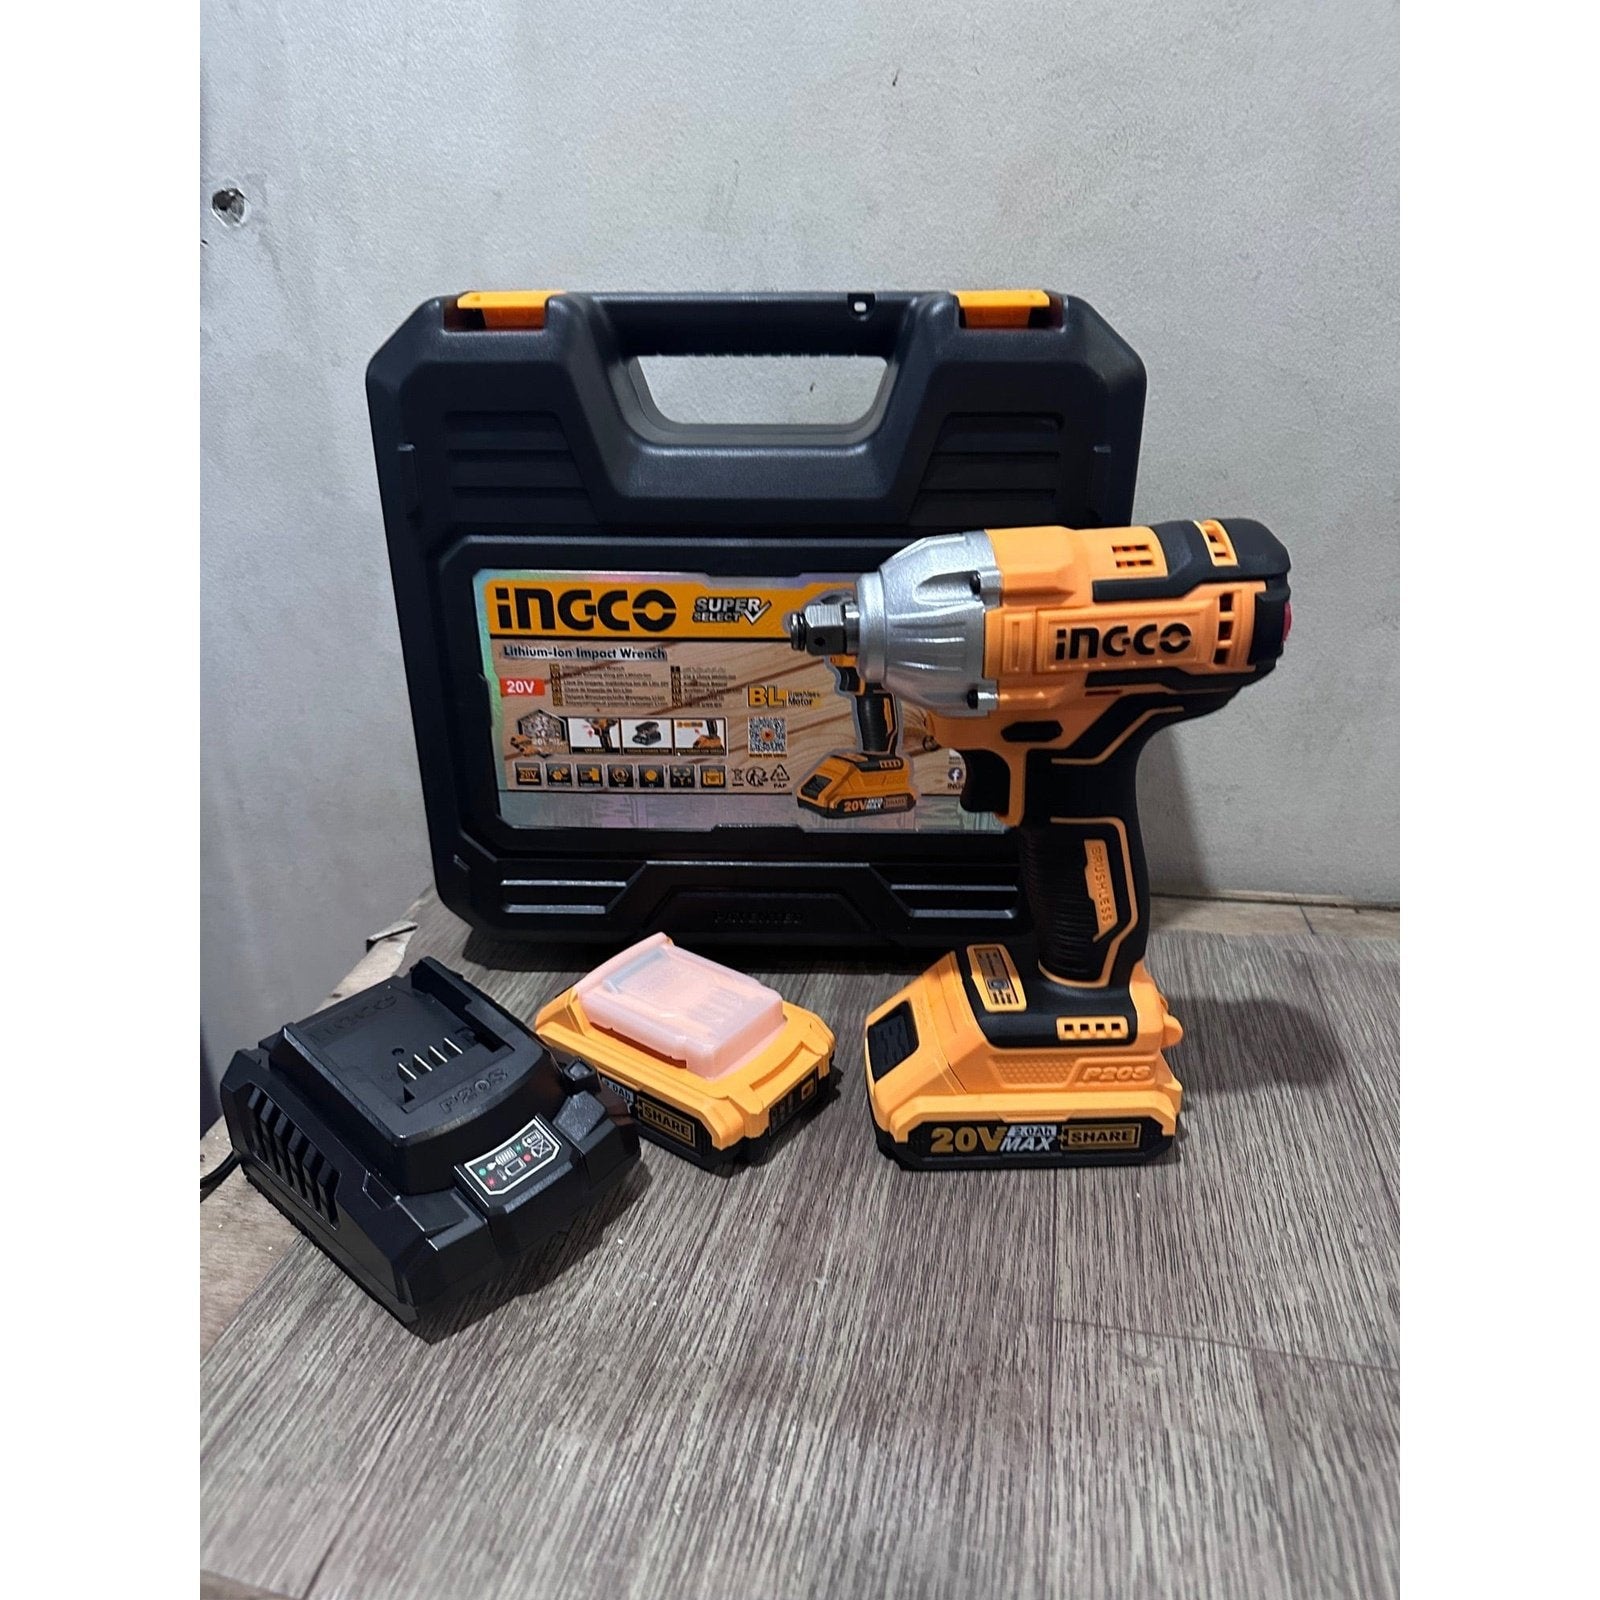 Buy Ingco 1/2" Lithium-Ion Cordless Impact Wrench 300NM - CIWLI2038 in Ghana | Supply Master Impact Wrench & Driver Buy Tools hardware Building materials